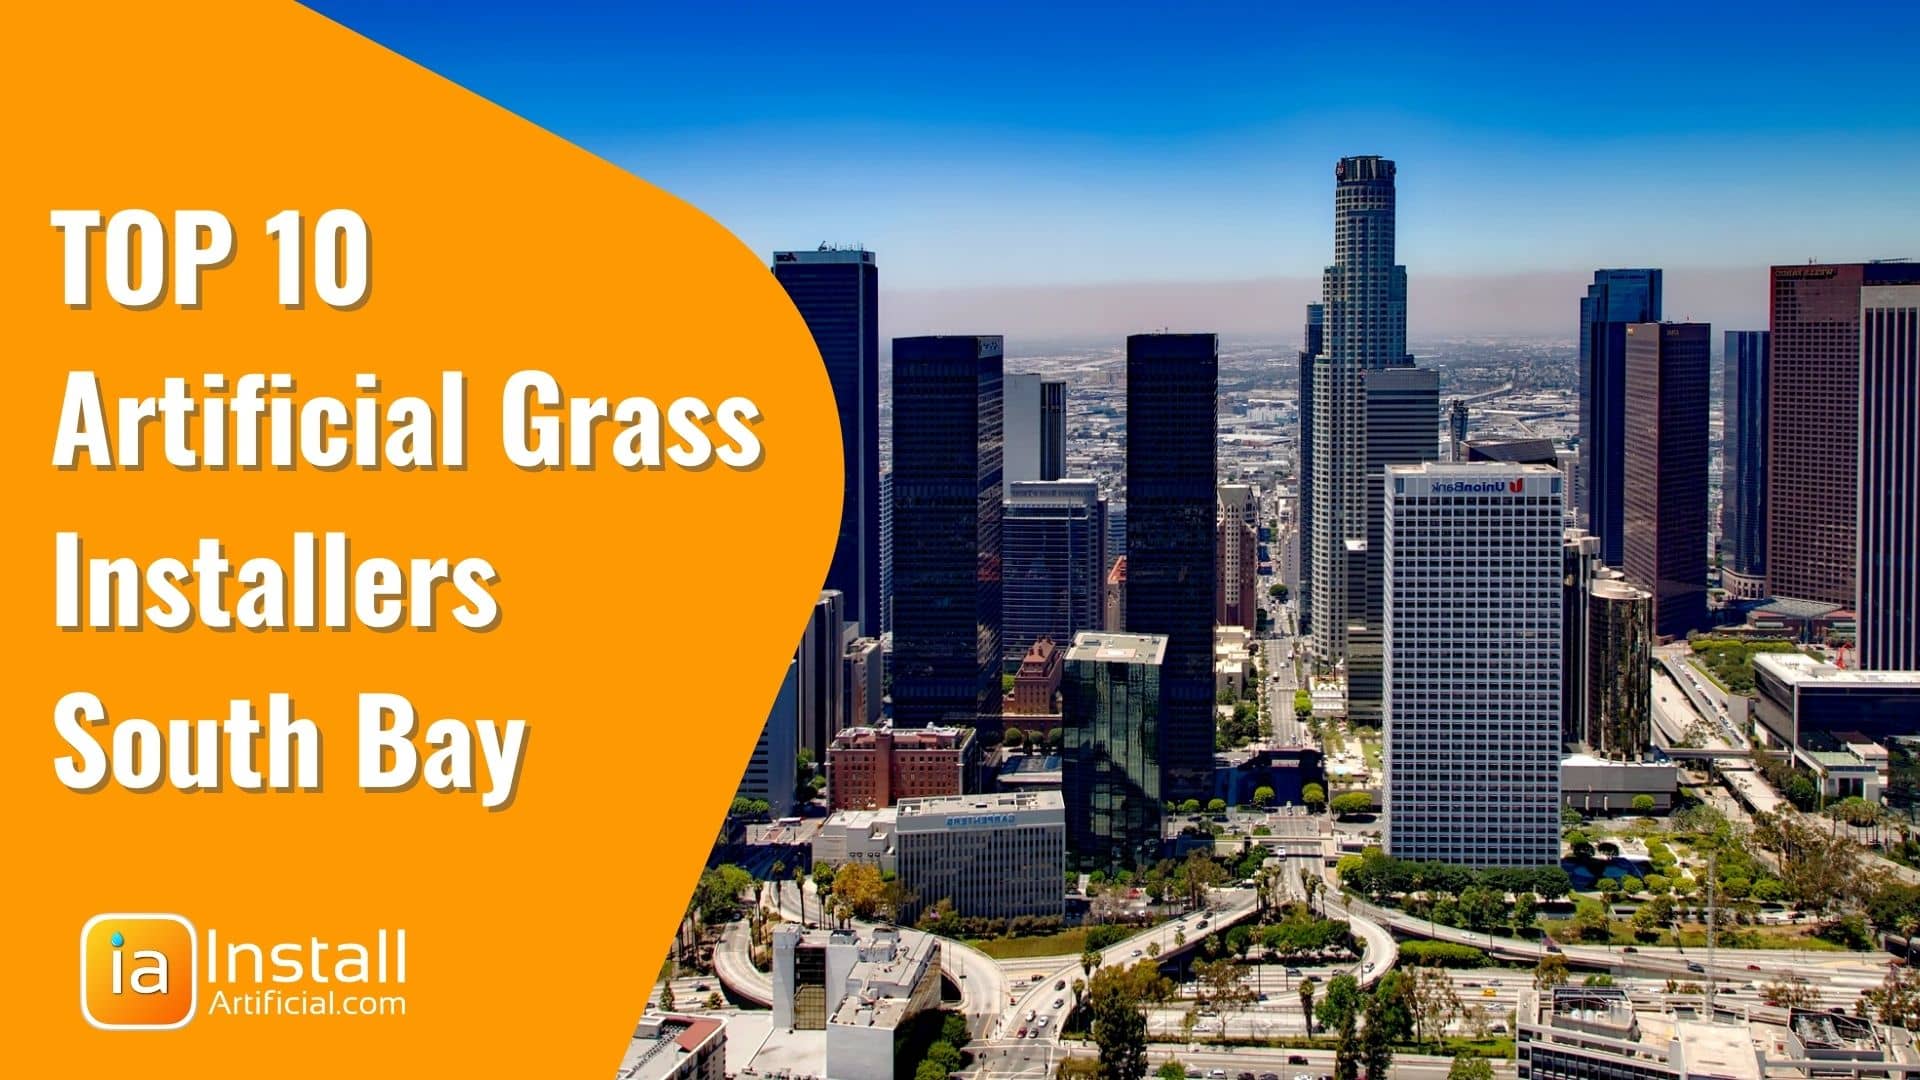 Top 10 Artificial Grass Installation Companies in South Bay Los Angeles